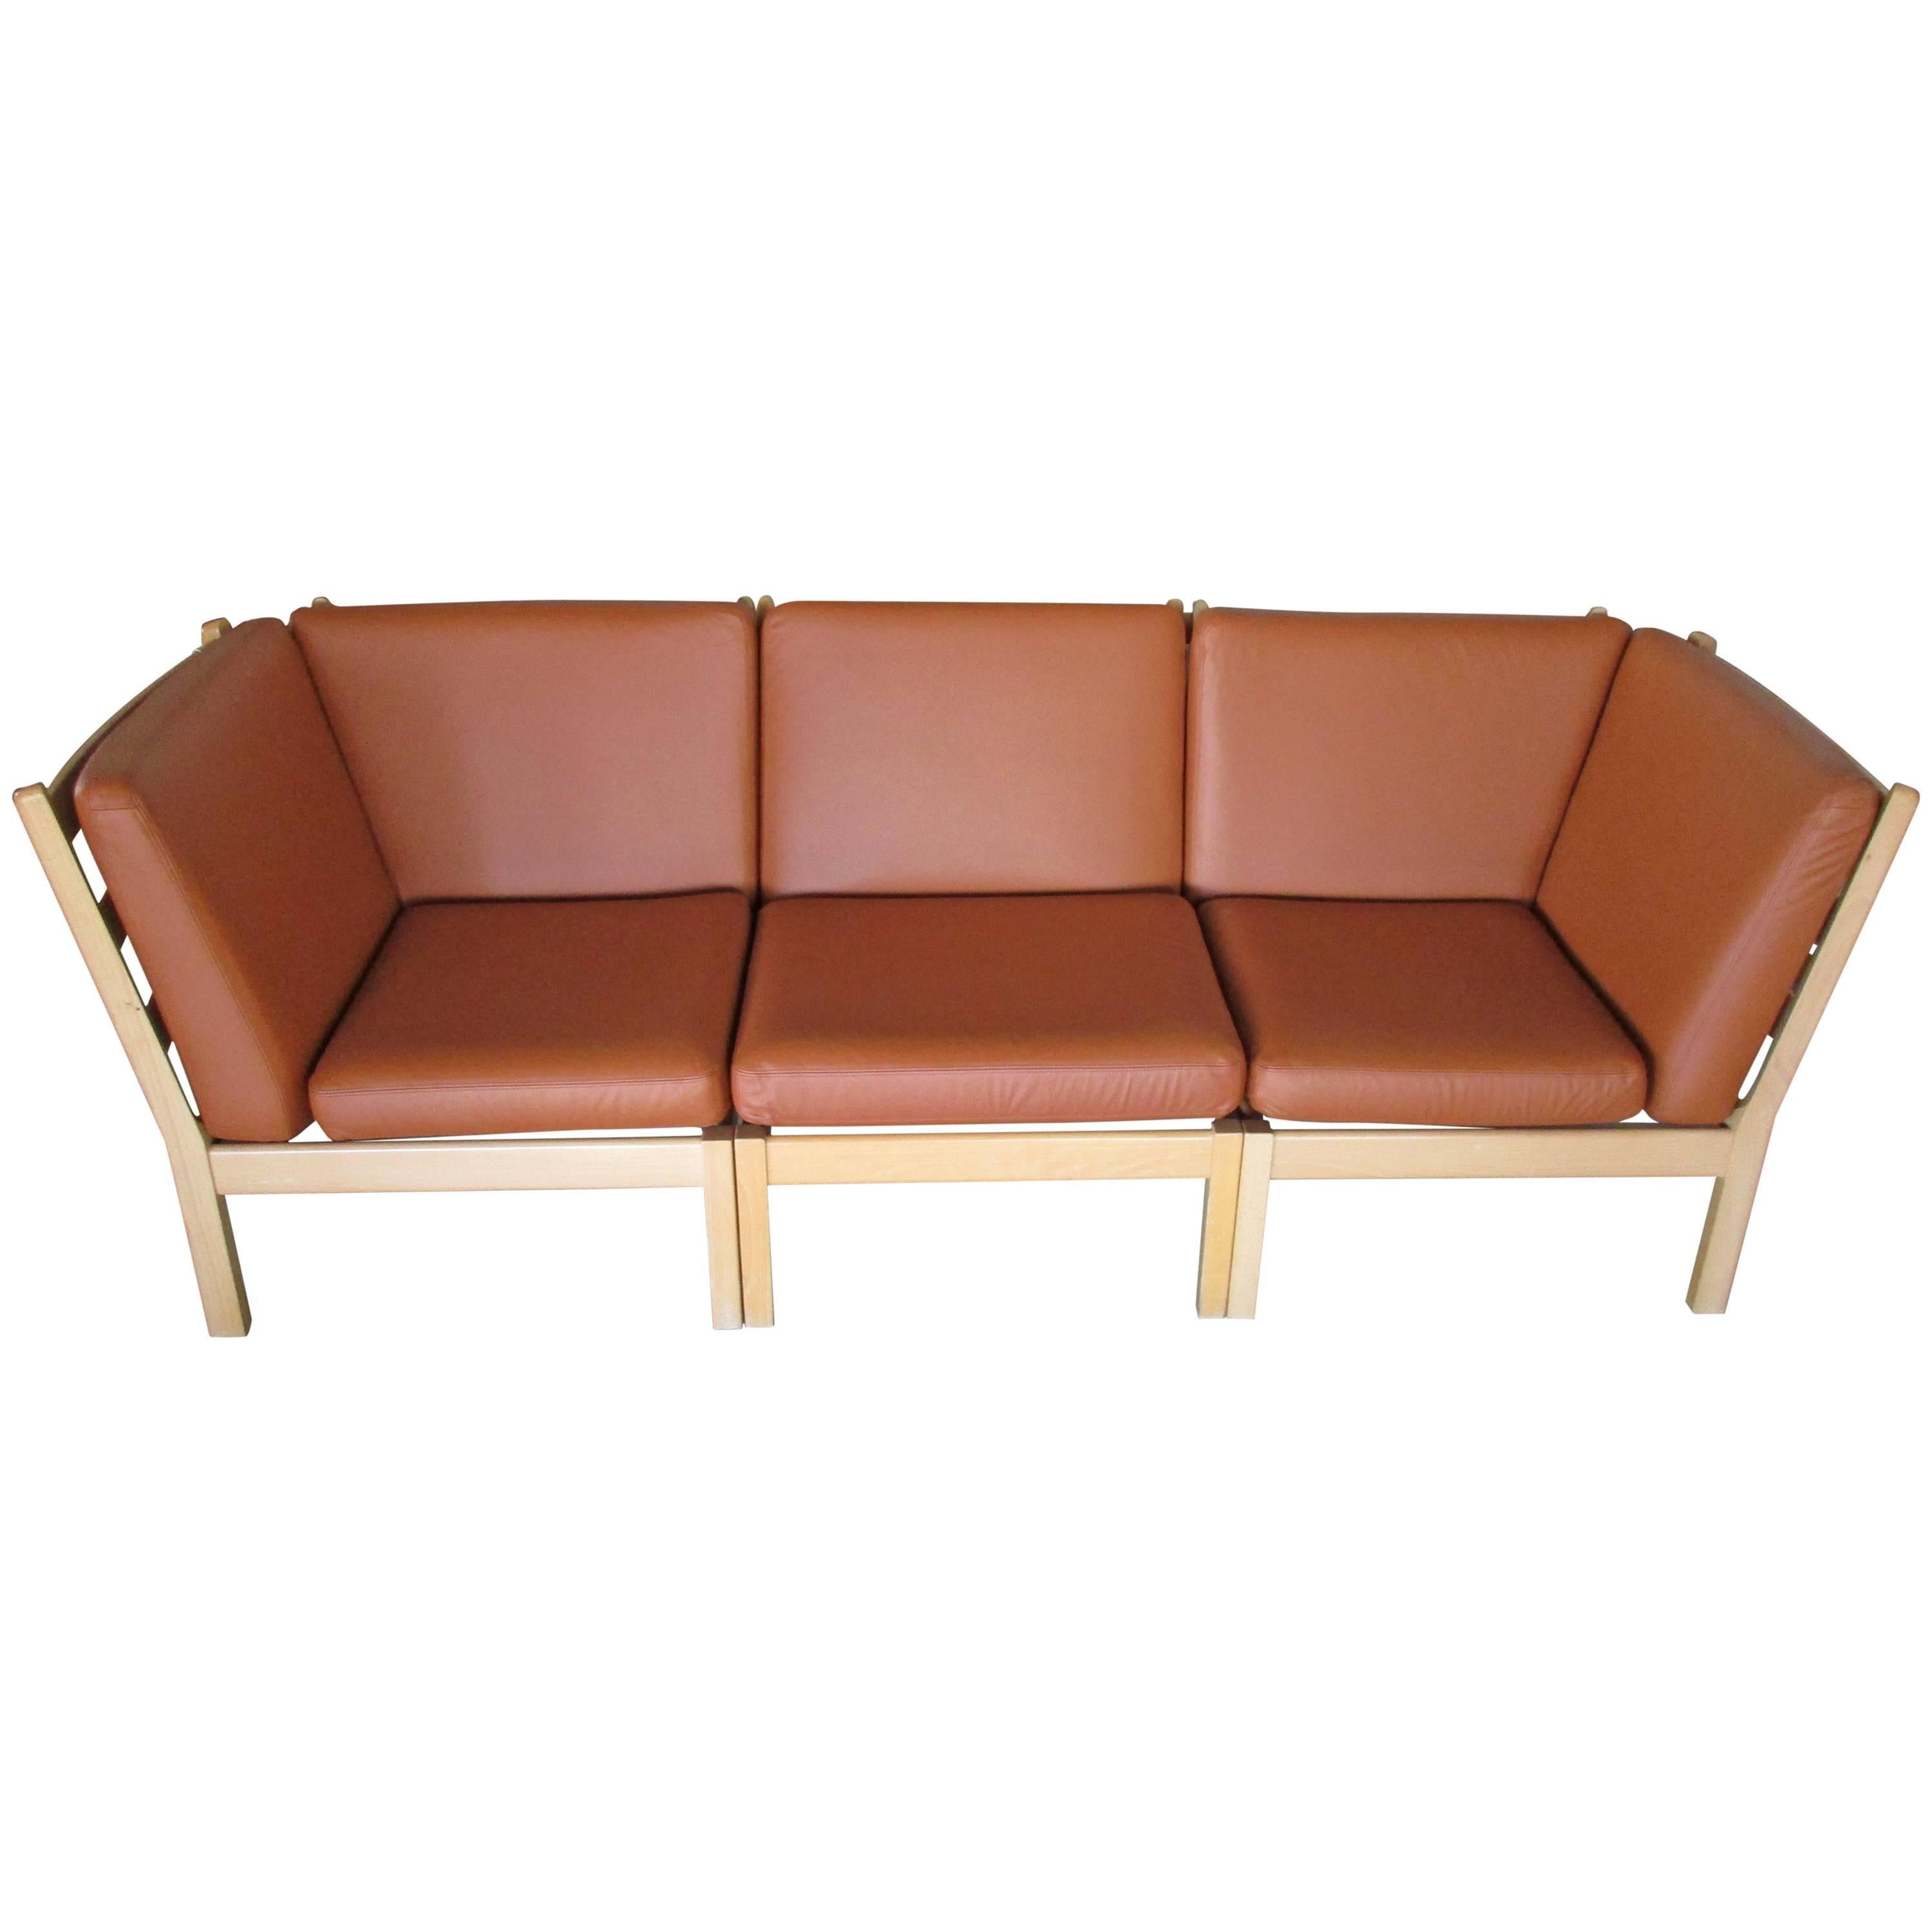 Hans J Wegner Model 280 Sectional Sofa in Beech and Cognac Leather For Sale